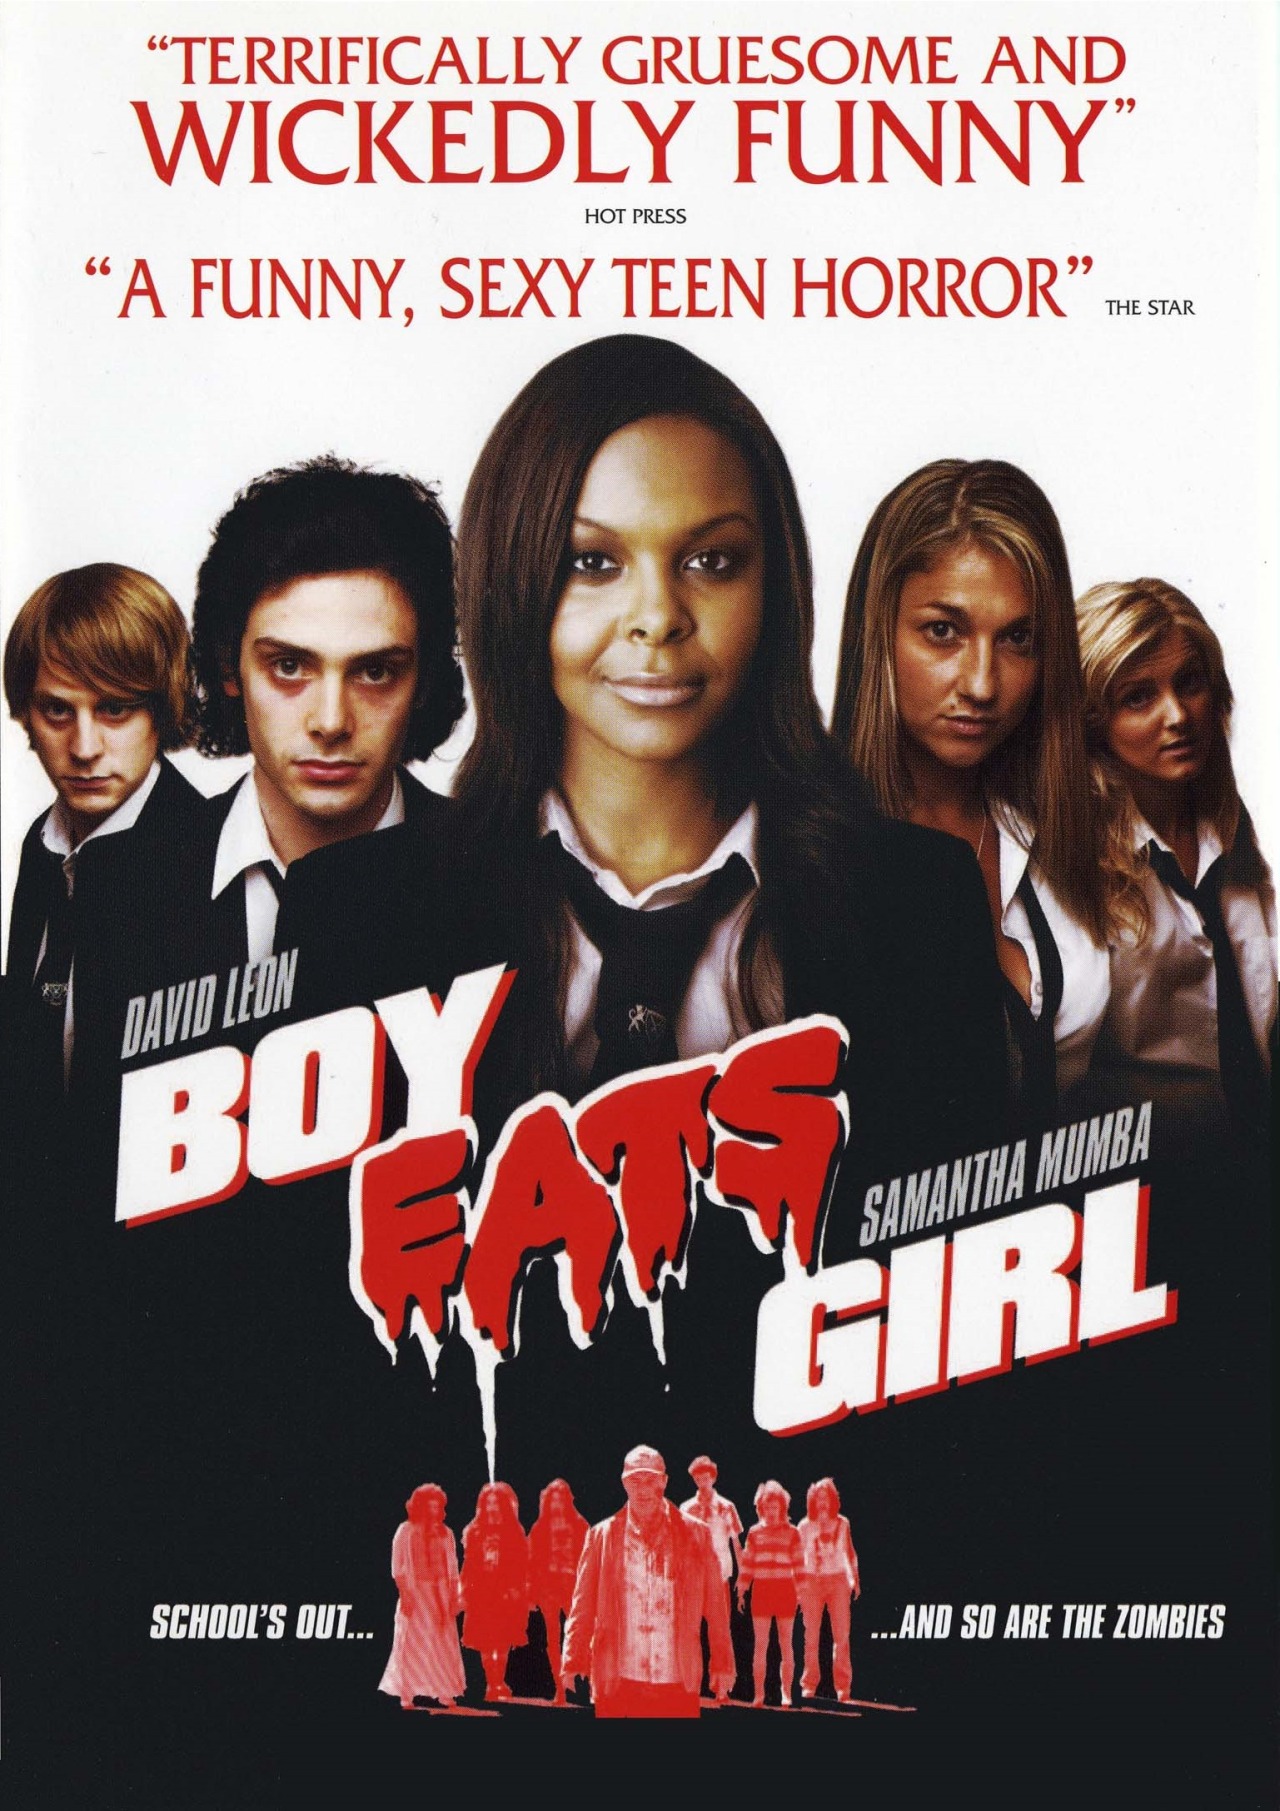 #boy eats girl #samantha mumba#comedy#horror#zombies #ive never forgotten this film #movie poster#film#movies#posters#movie posters#films#poster